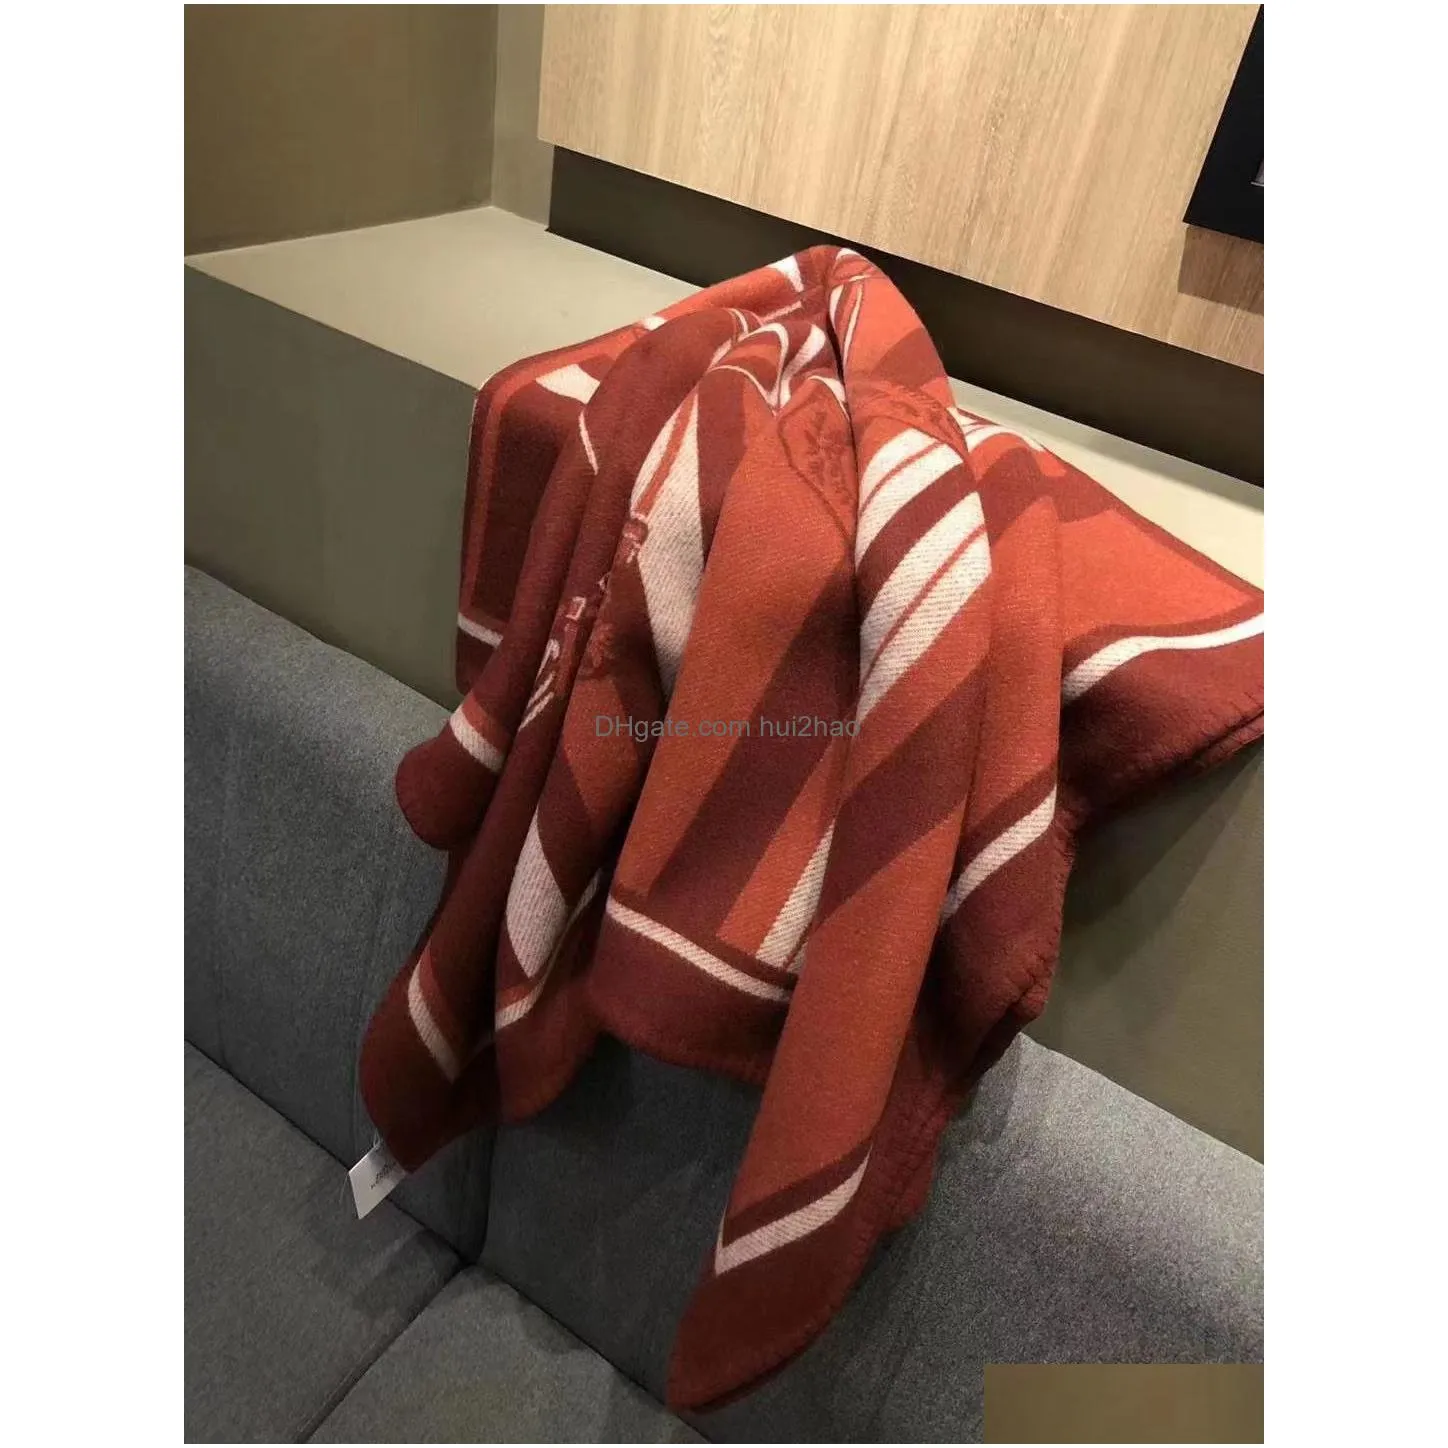 h blanket horse wool blankets good quailty top selling big size 3 colors thick home sofa 3 colors